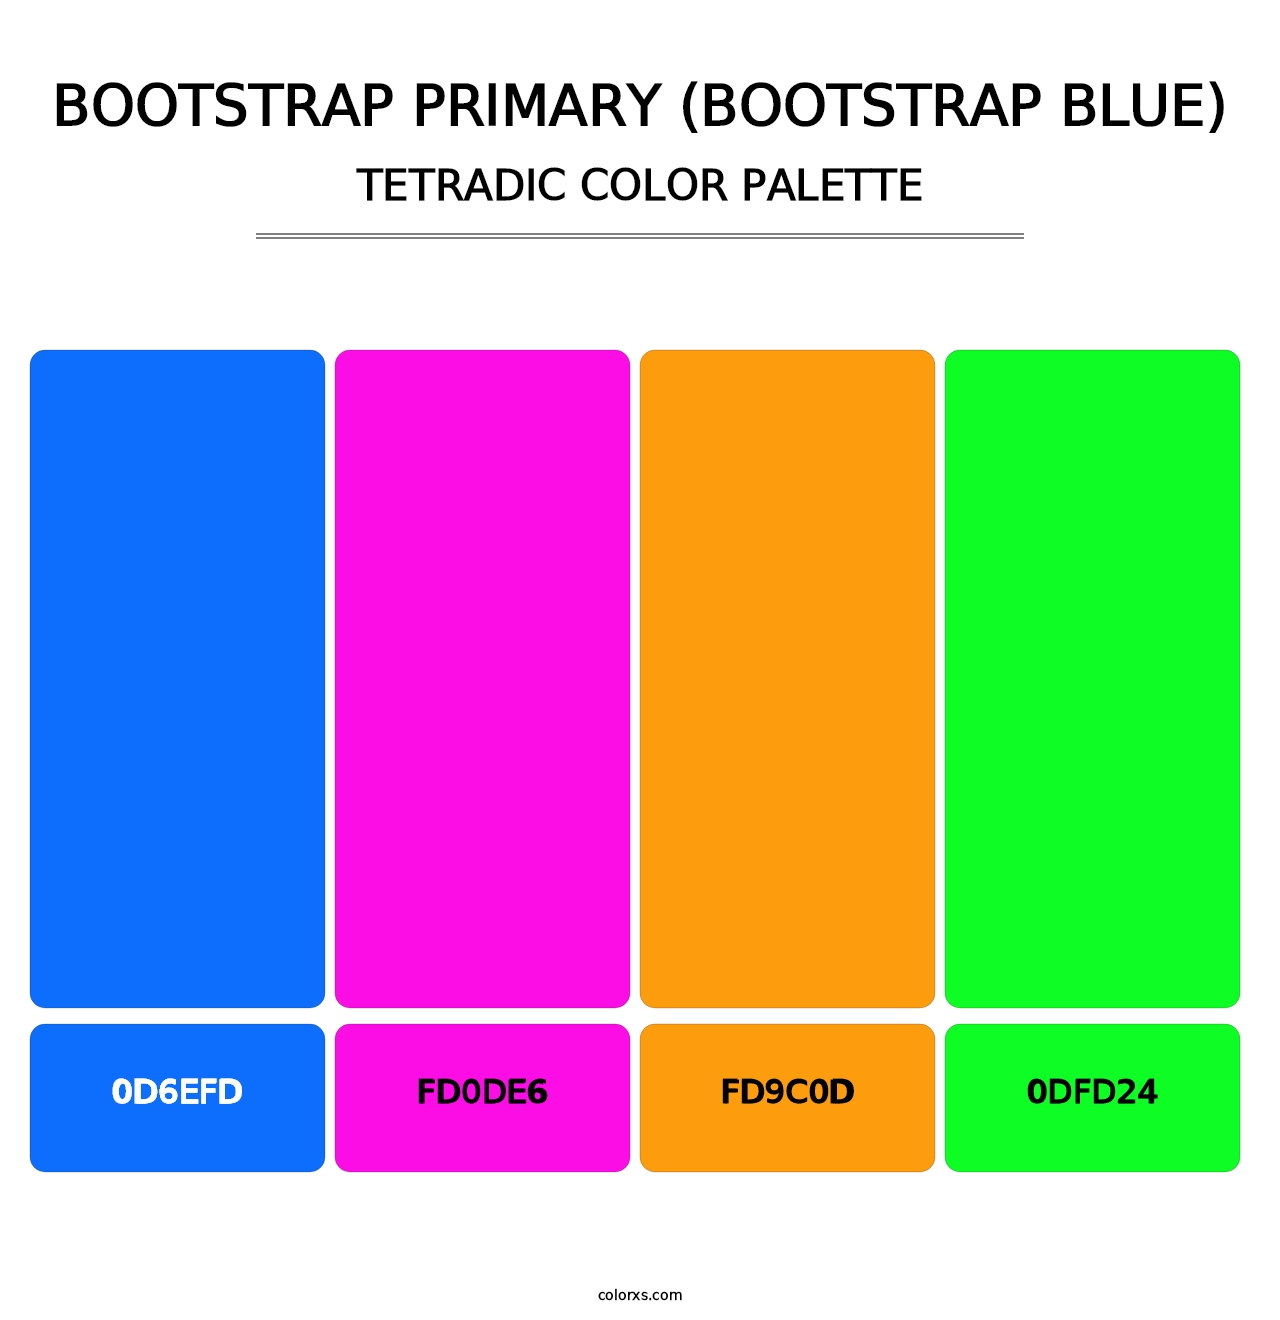 Bootstrap Primary (Bootstrap Blue) - Tetradic Color Palette